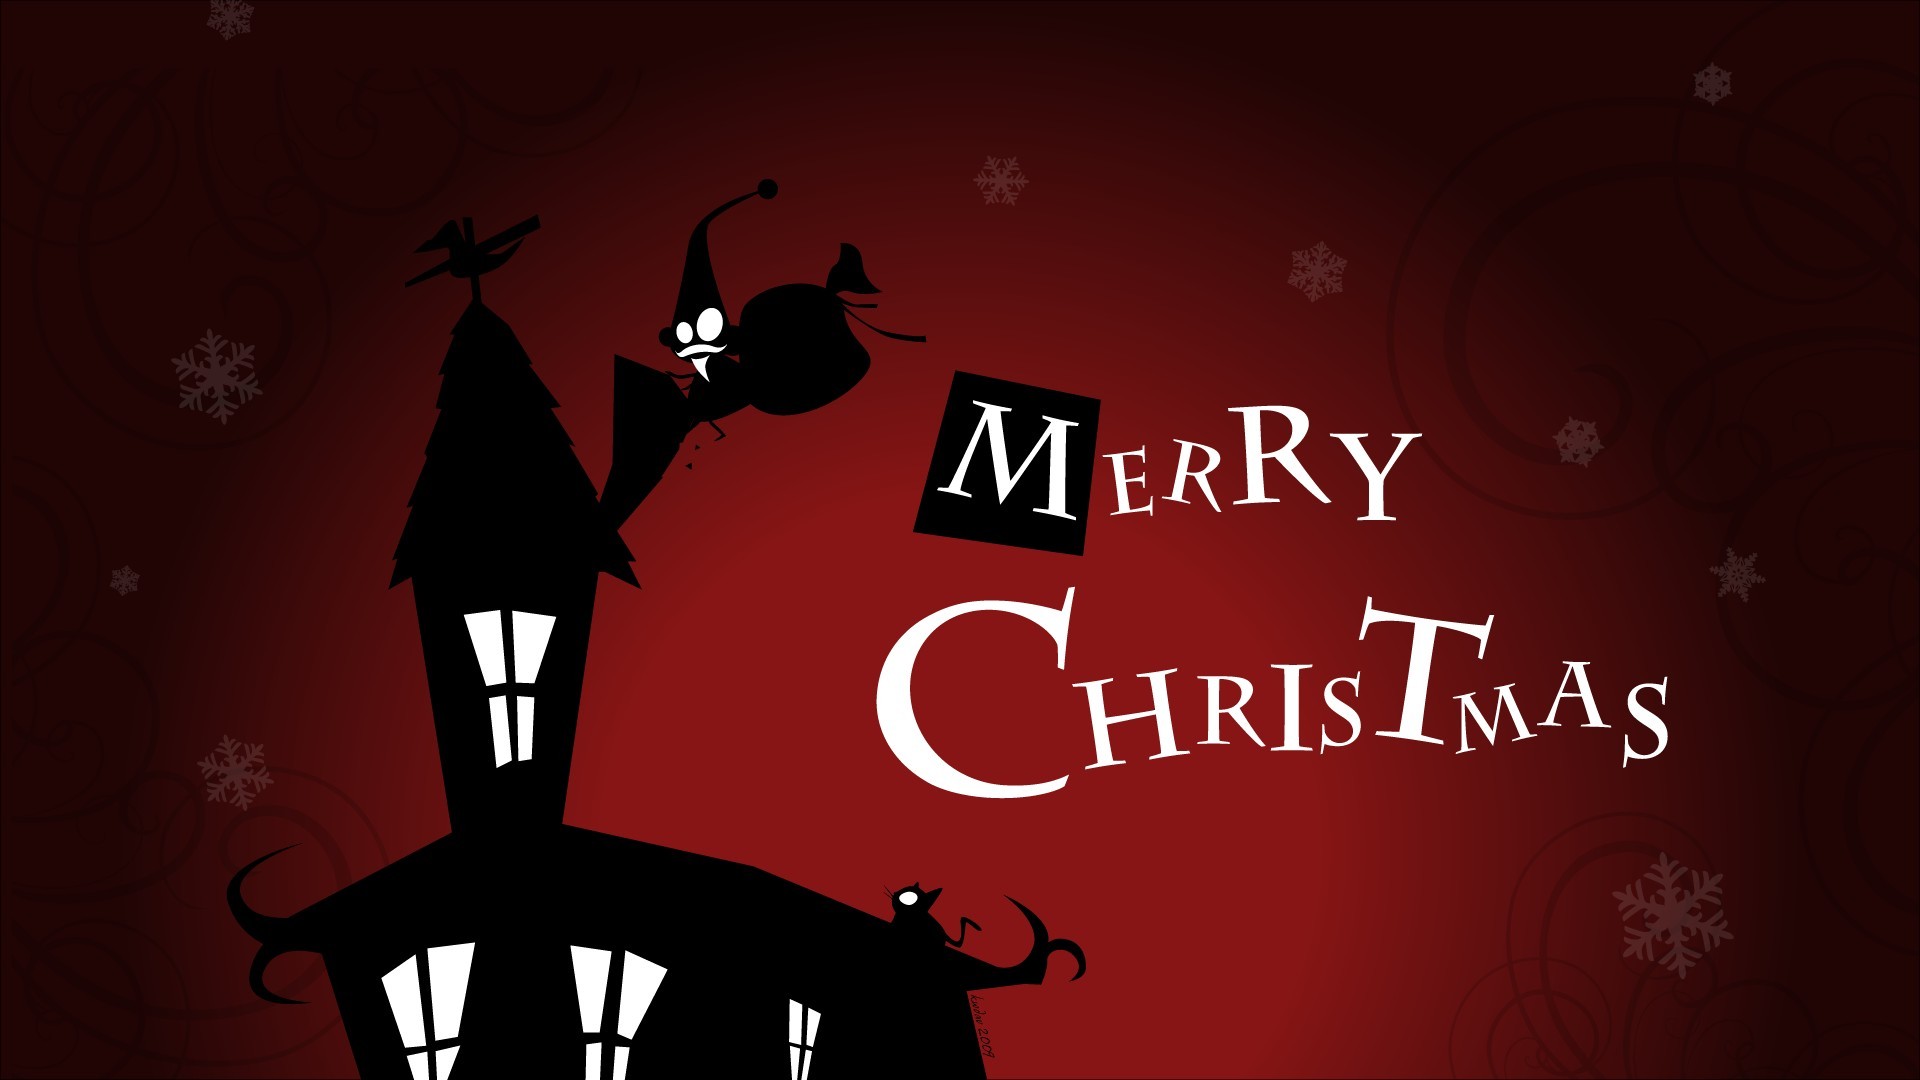 Merry Christmas Cartoon Images HD Wallpapers